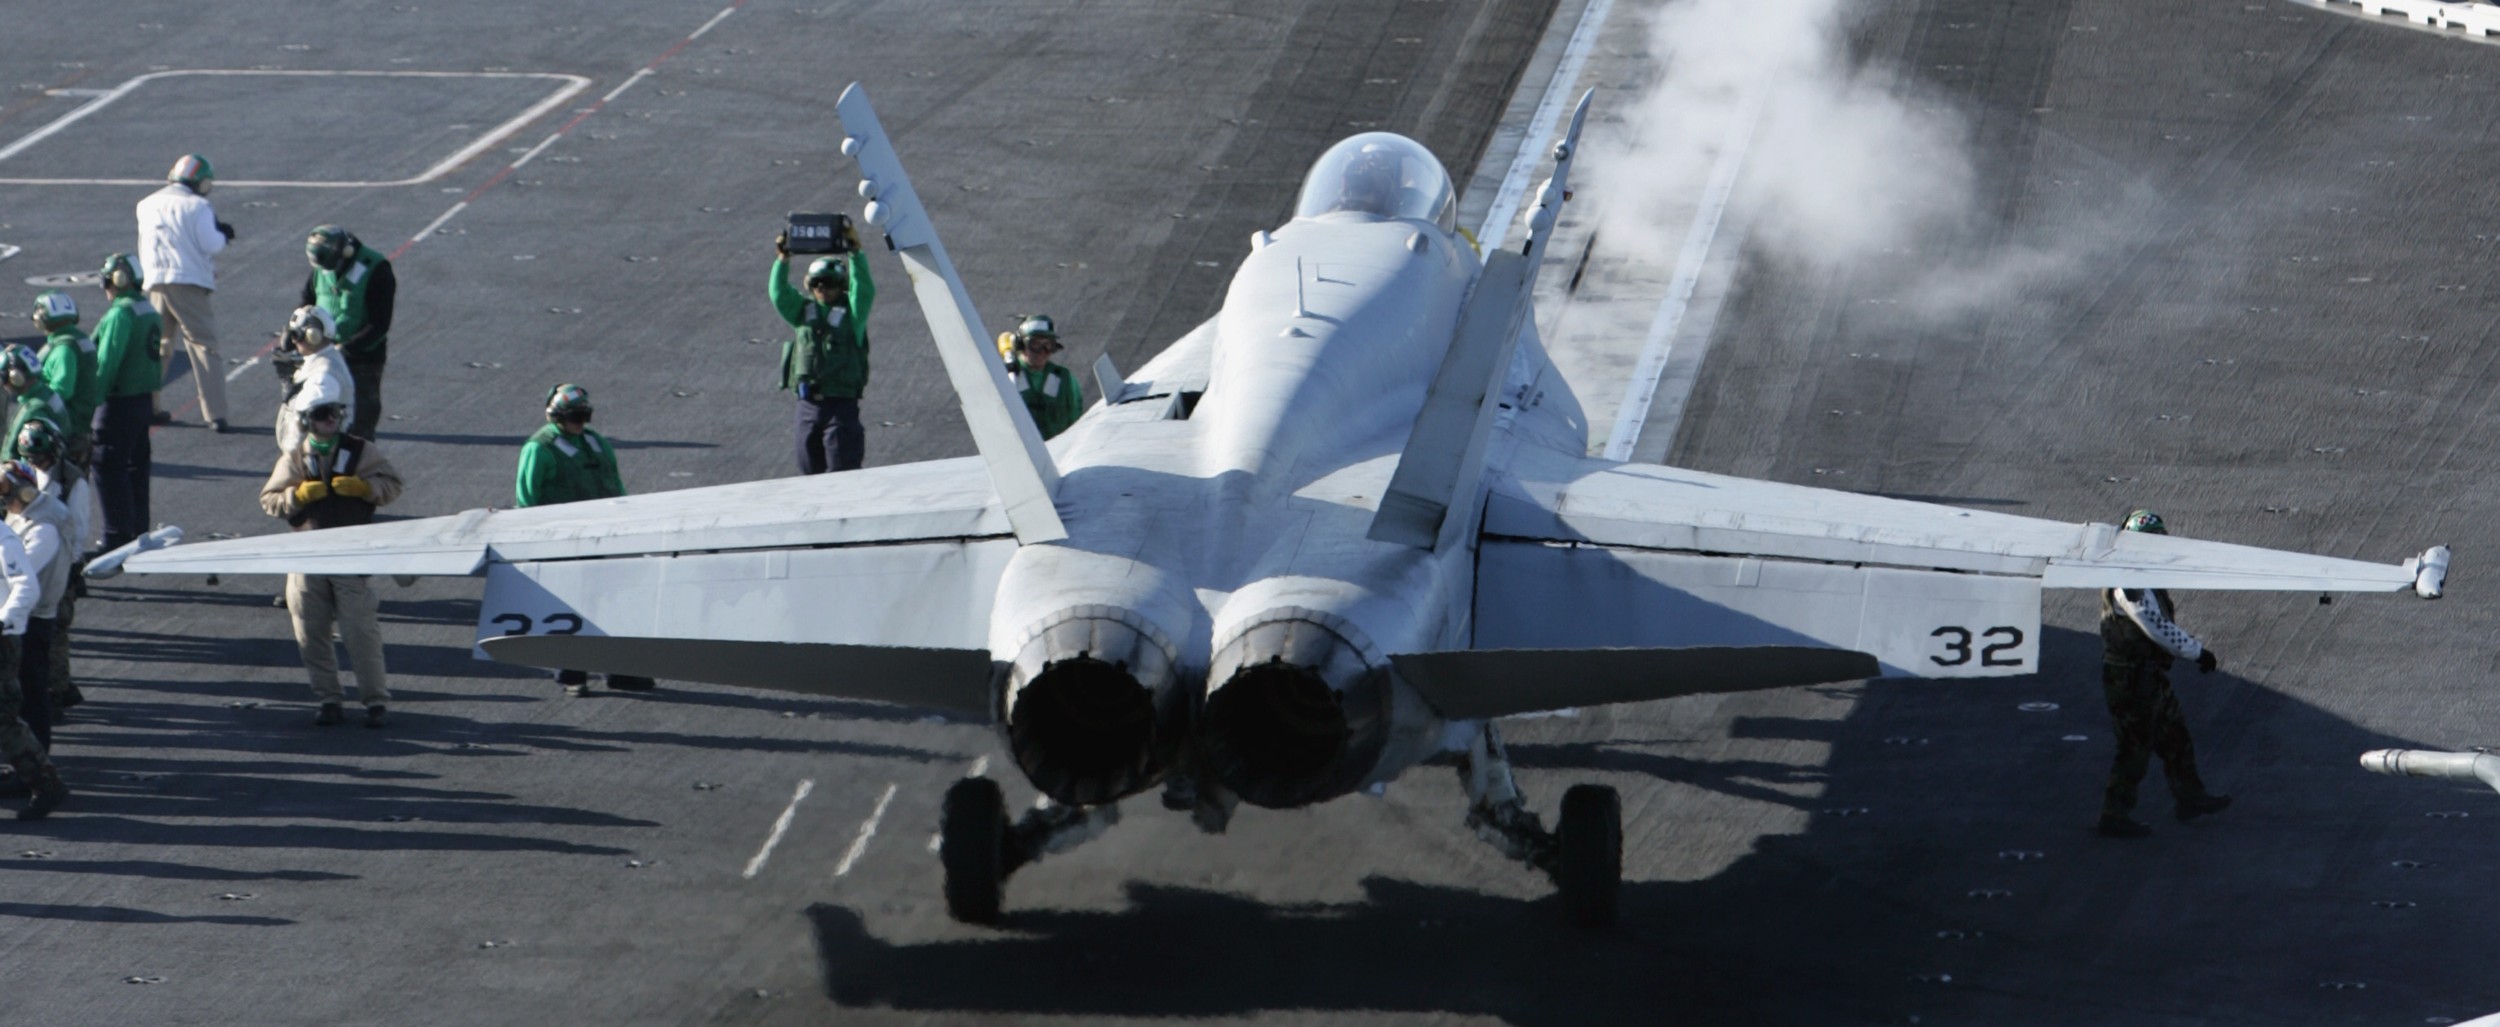 vmfat-101 sharpshooters marine fighter attack training squadron f/a-18c hornet 32